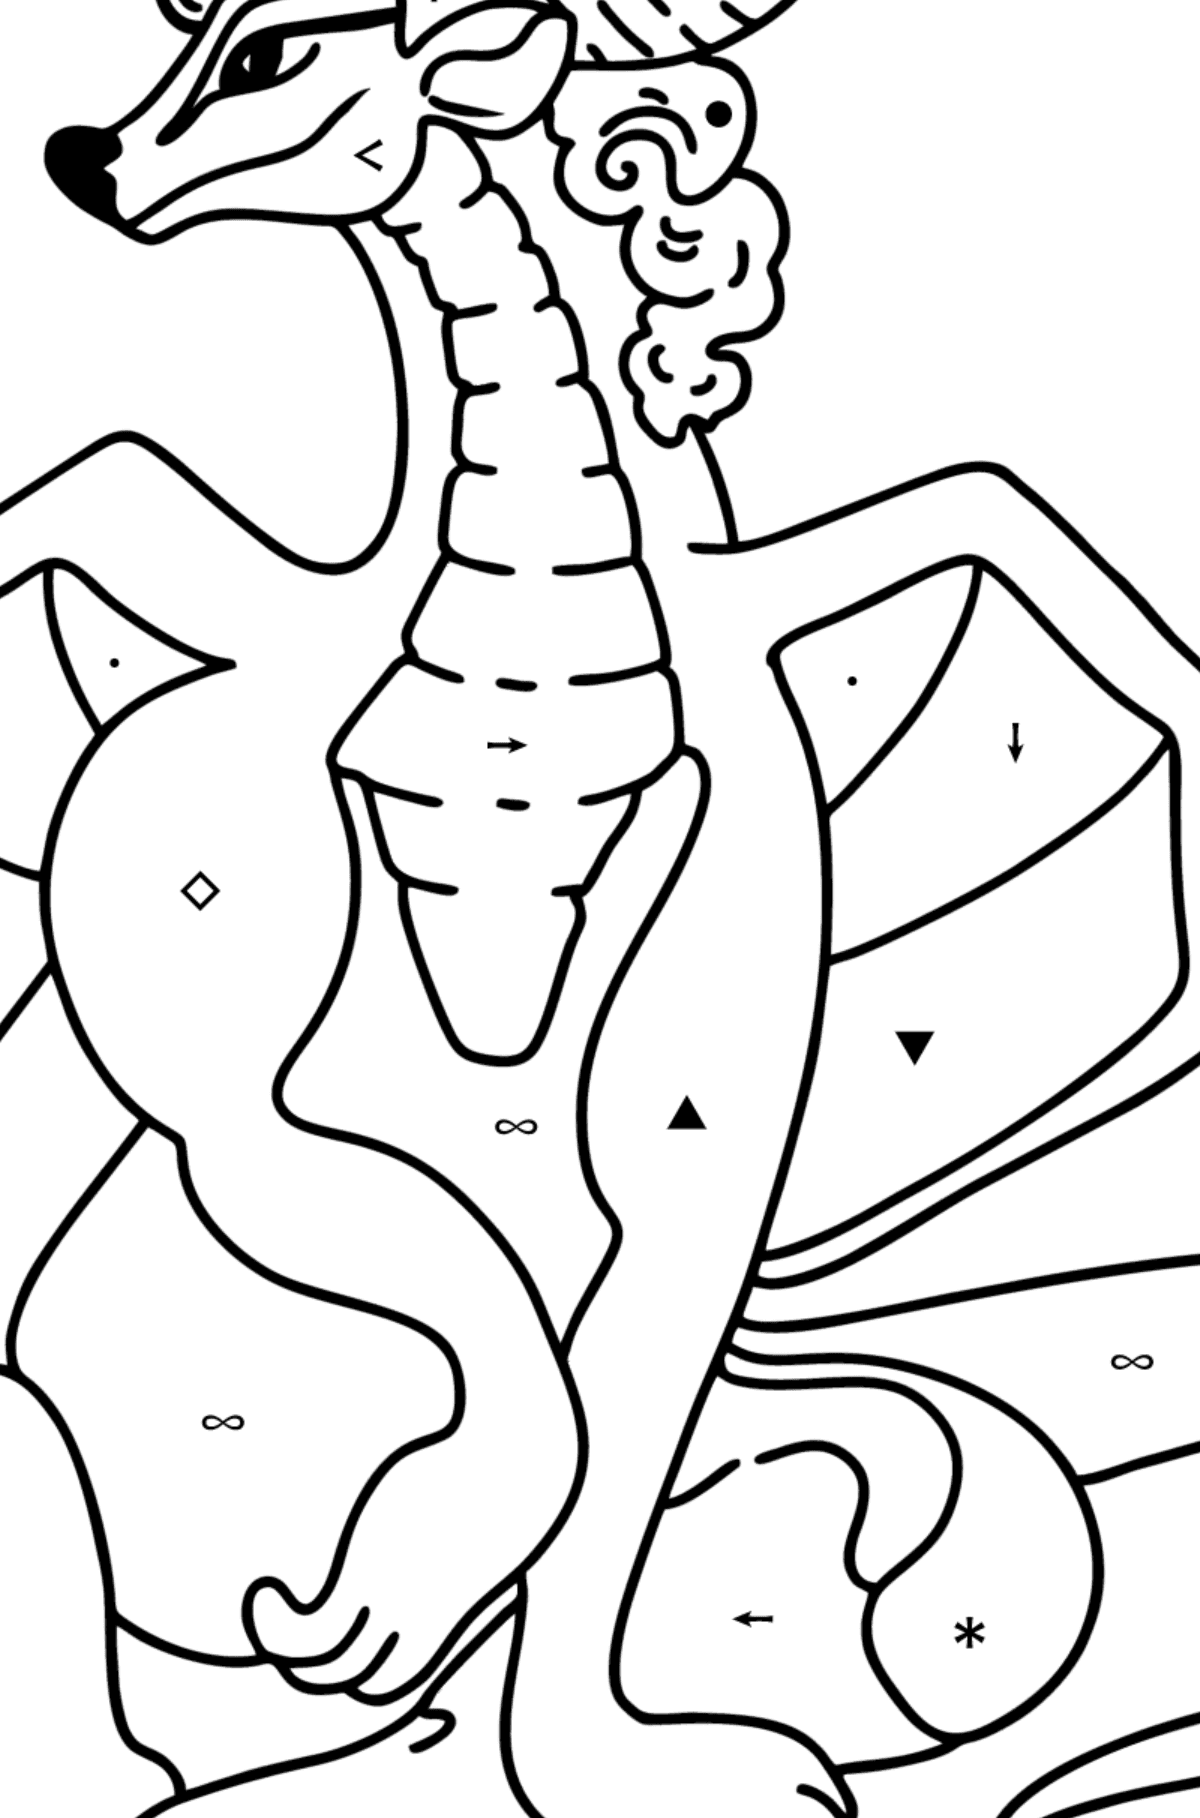 Happy Dragon coloring page - Coloring by Symbols for Kids